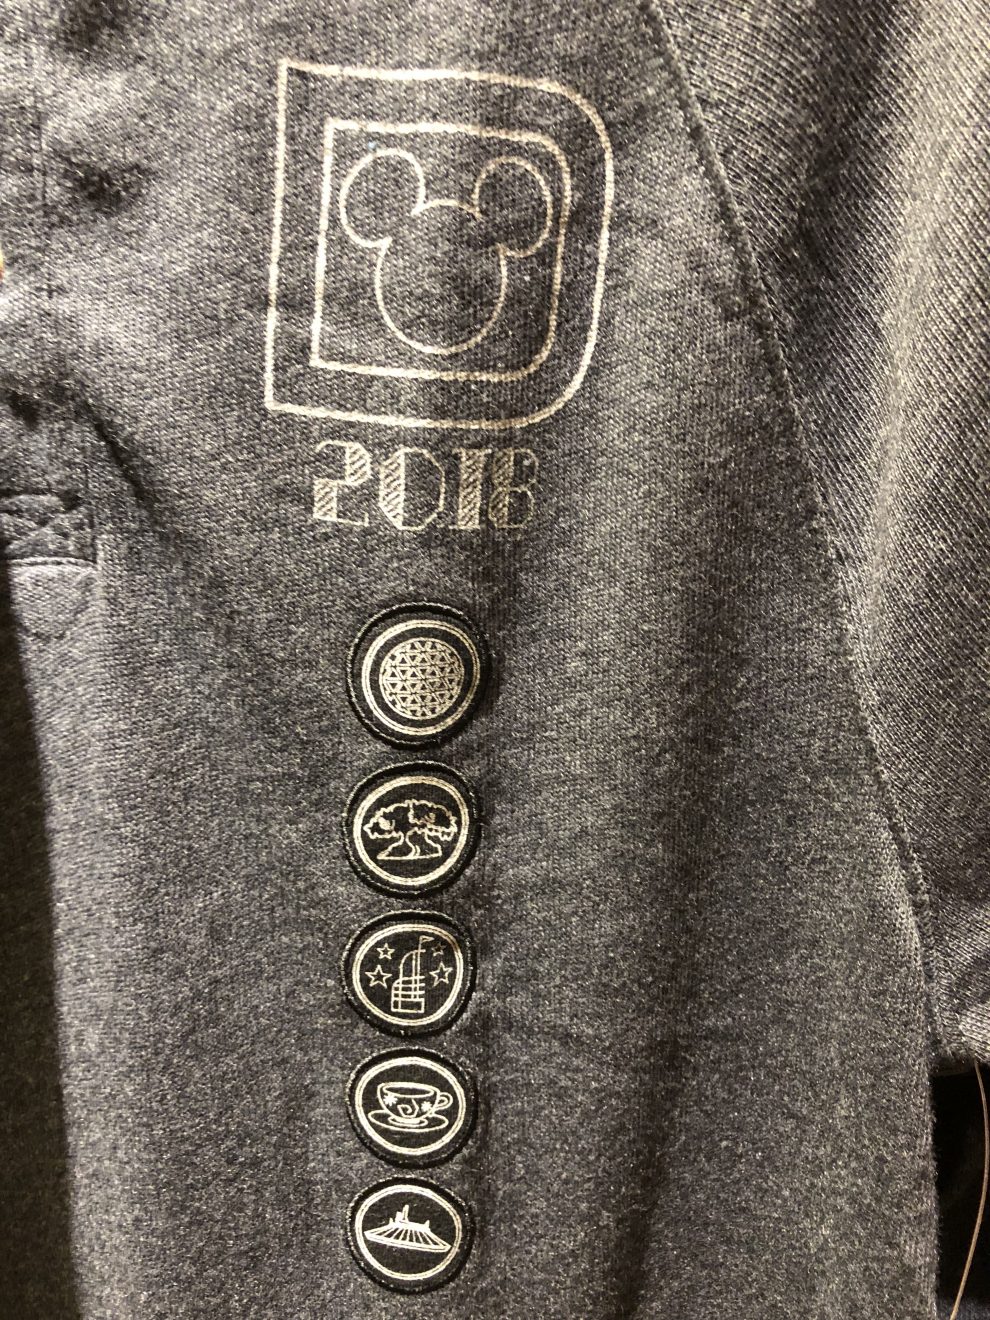 New 2018 Themed Clothing is Now Available - Disney World